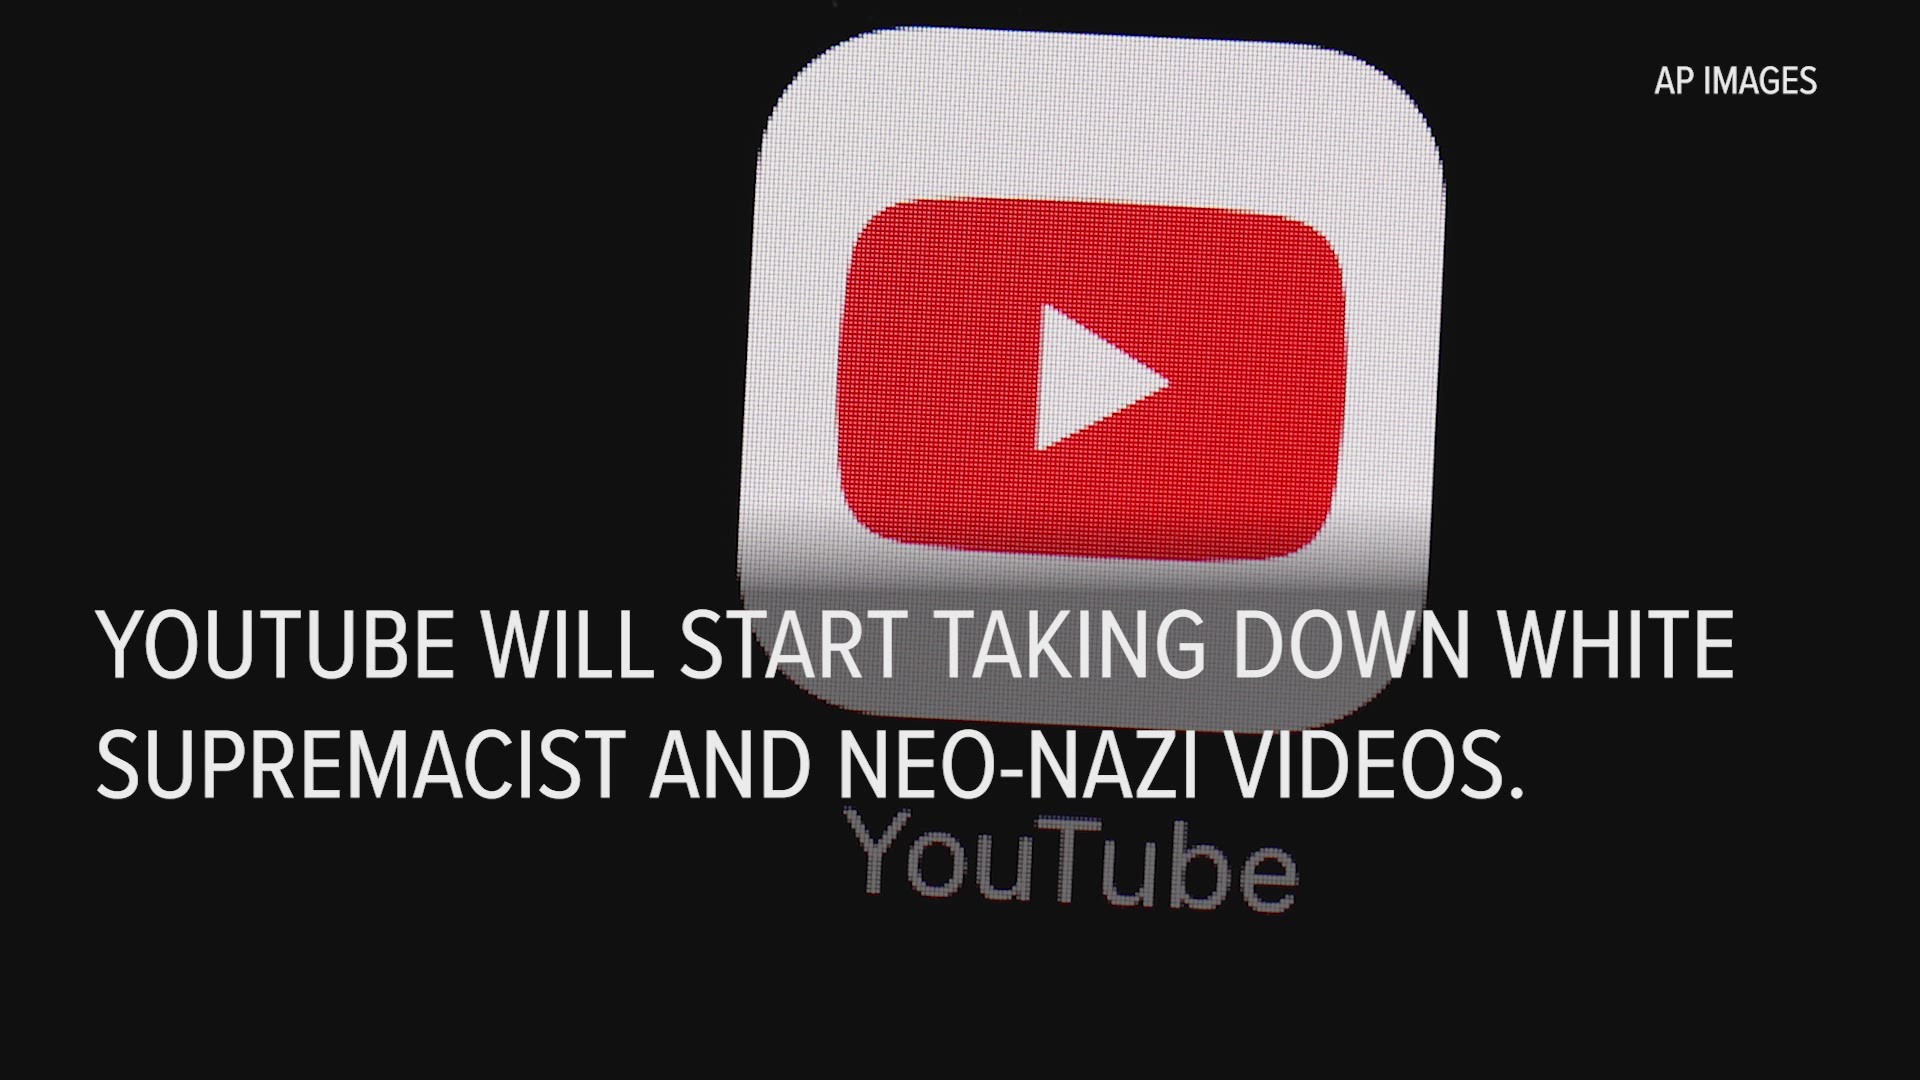 YouTube is cracking down on hate speech by removing videos that contain white supremacist and Neo-Nazi content.